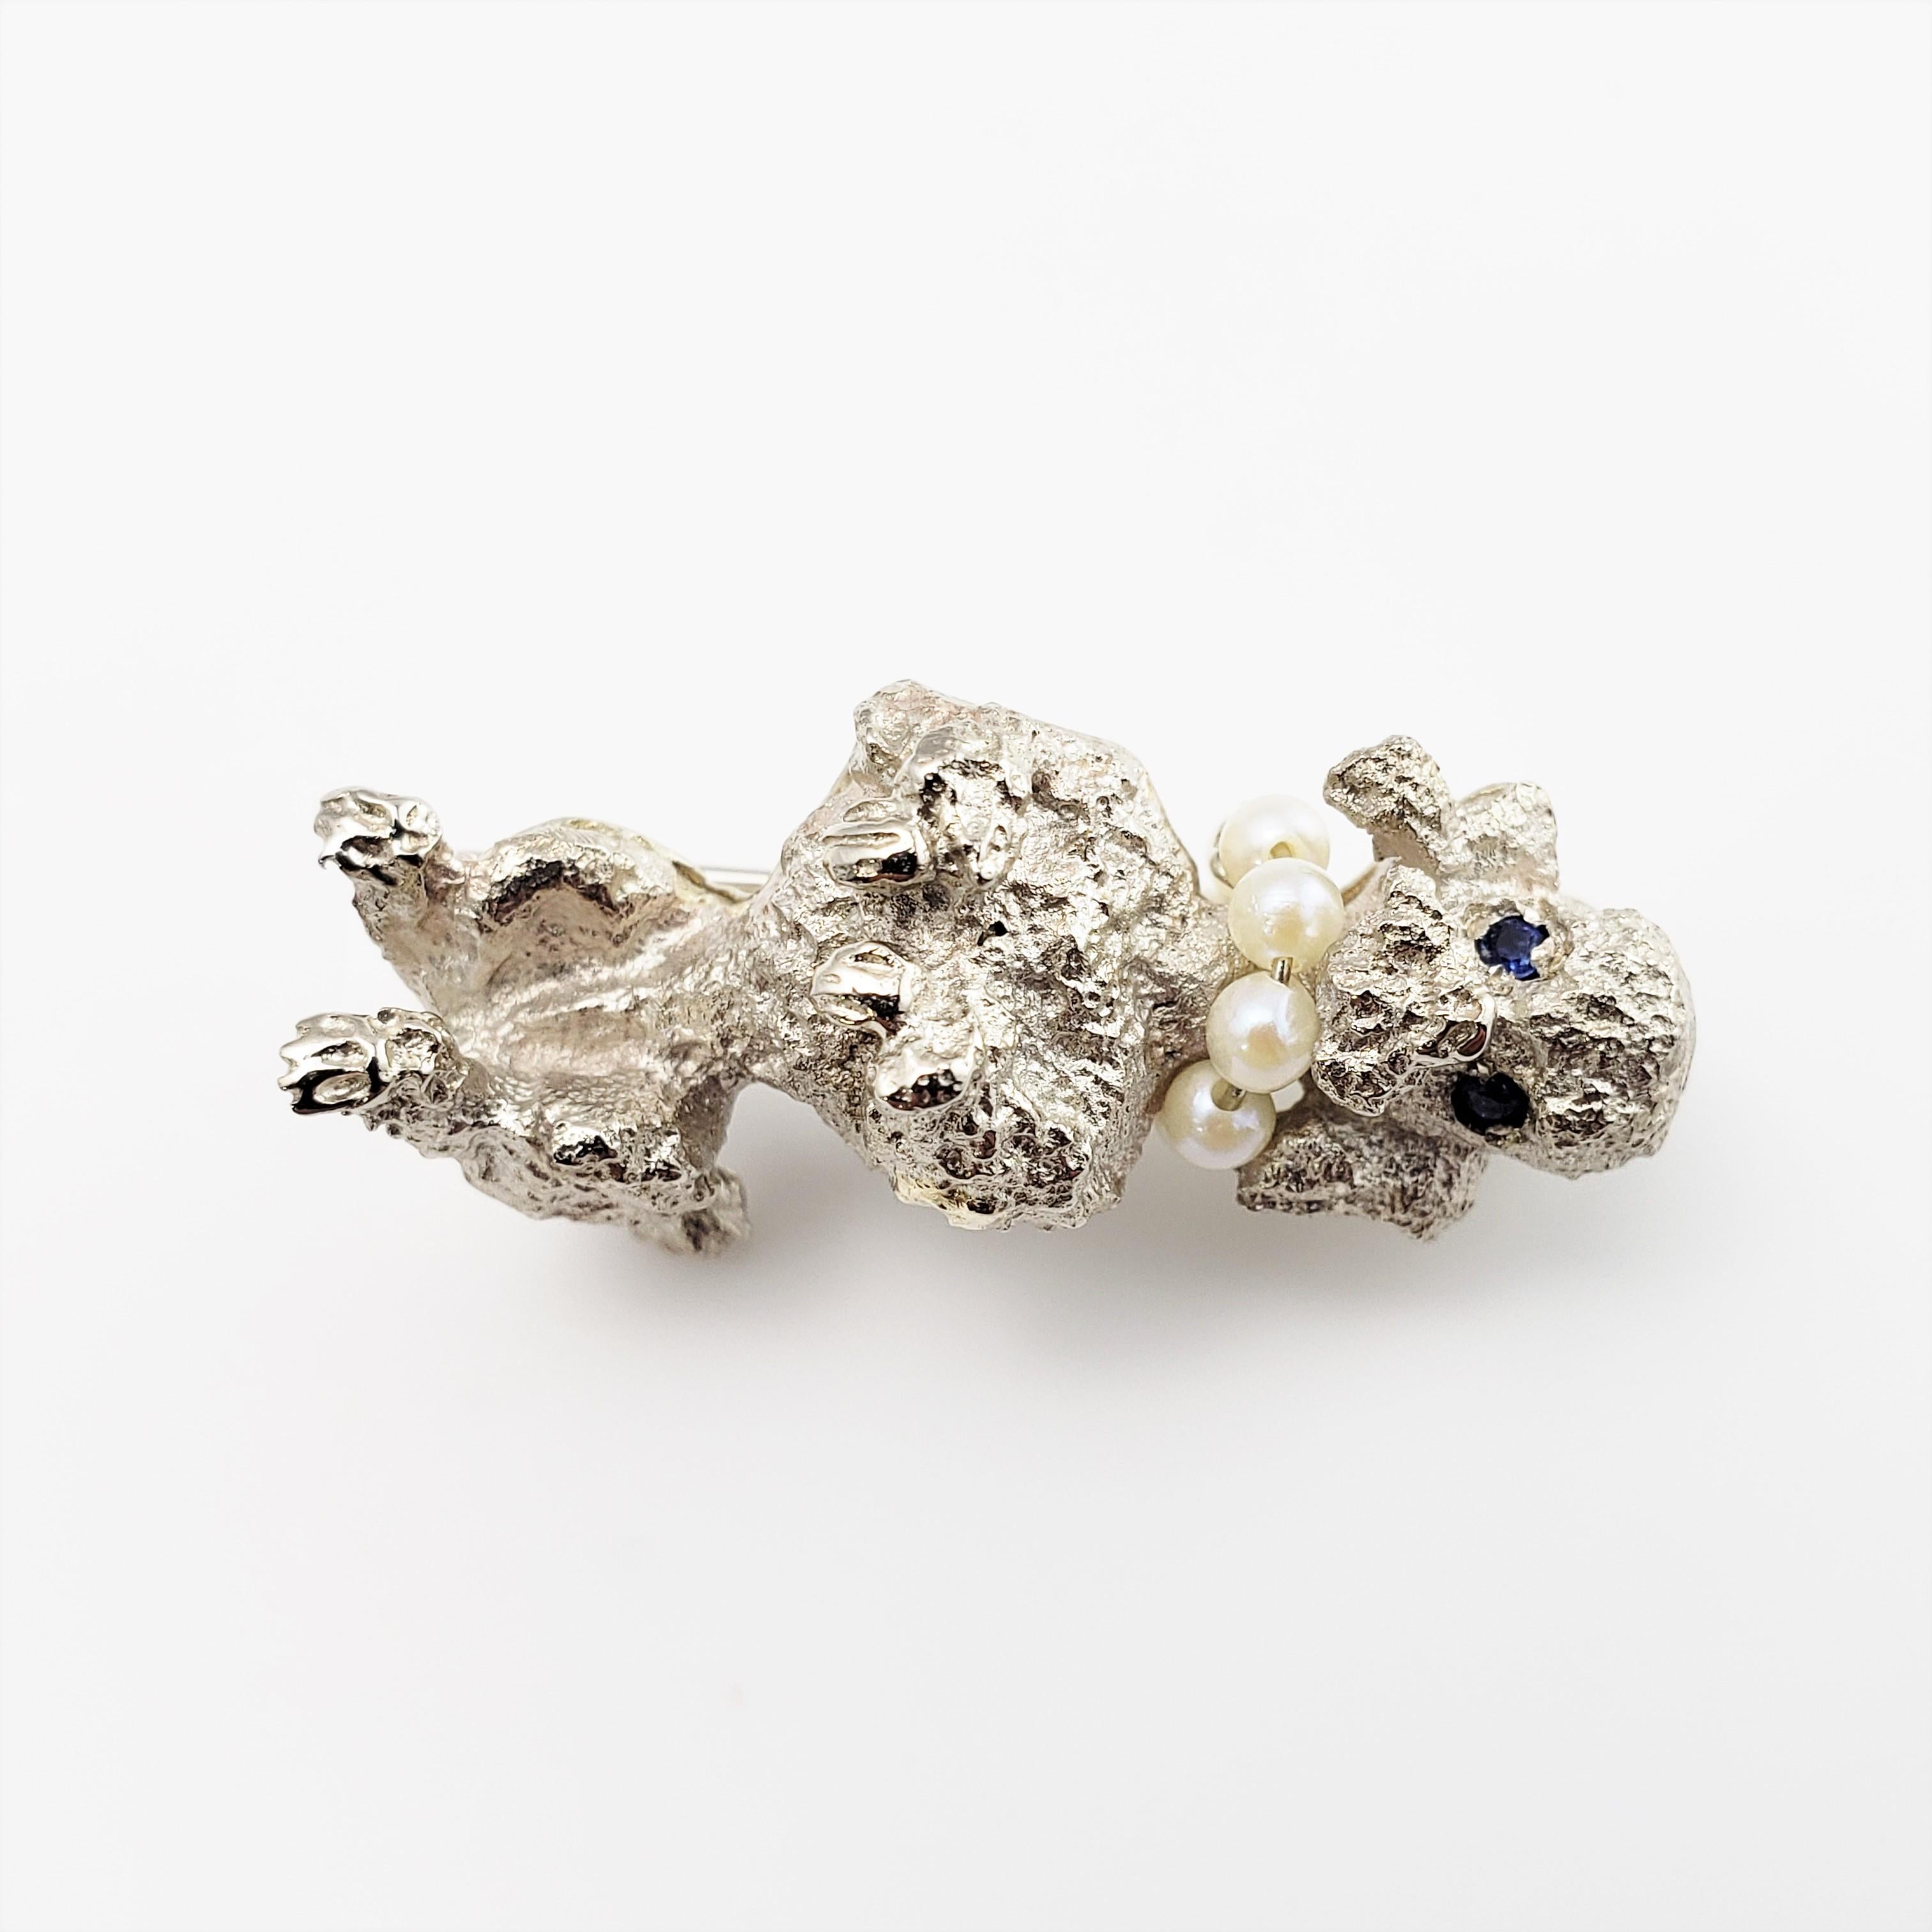 14 Karat White Gold, Pearl and Sapphire Poodle Brooch/Pin-

This lovely poodle brooch features two sapphire eyes and a pearl collar (eight 2 mm pearls) crafted in beautifully detailed 14K white gold.

Size:  1.2 inches x 0.5 inches

Weight:  5.0